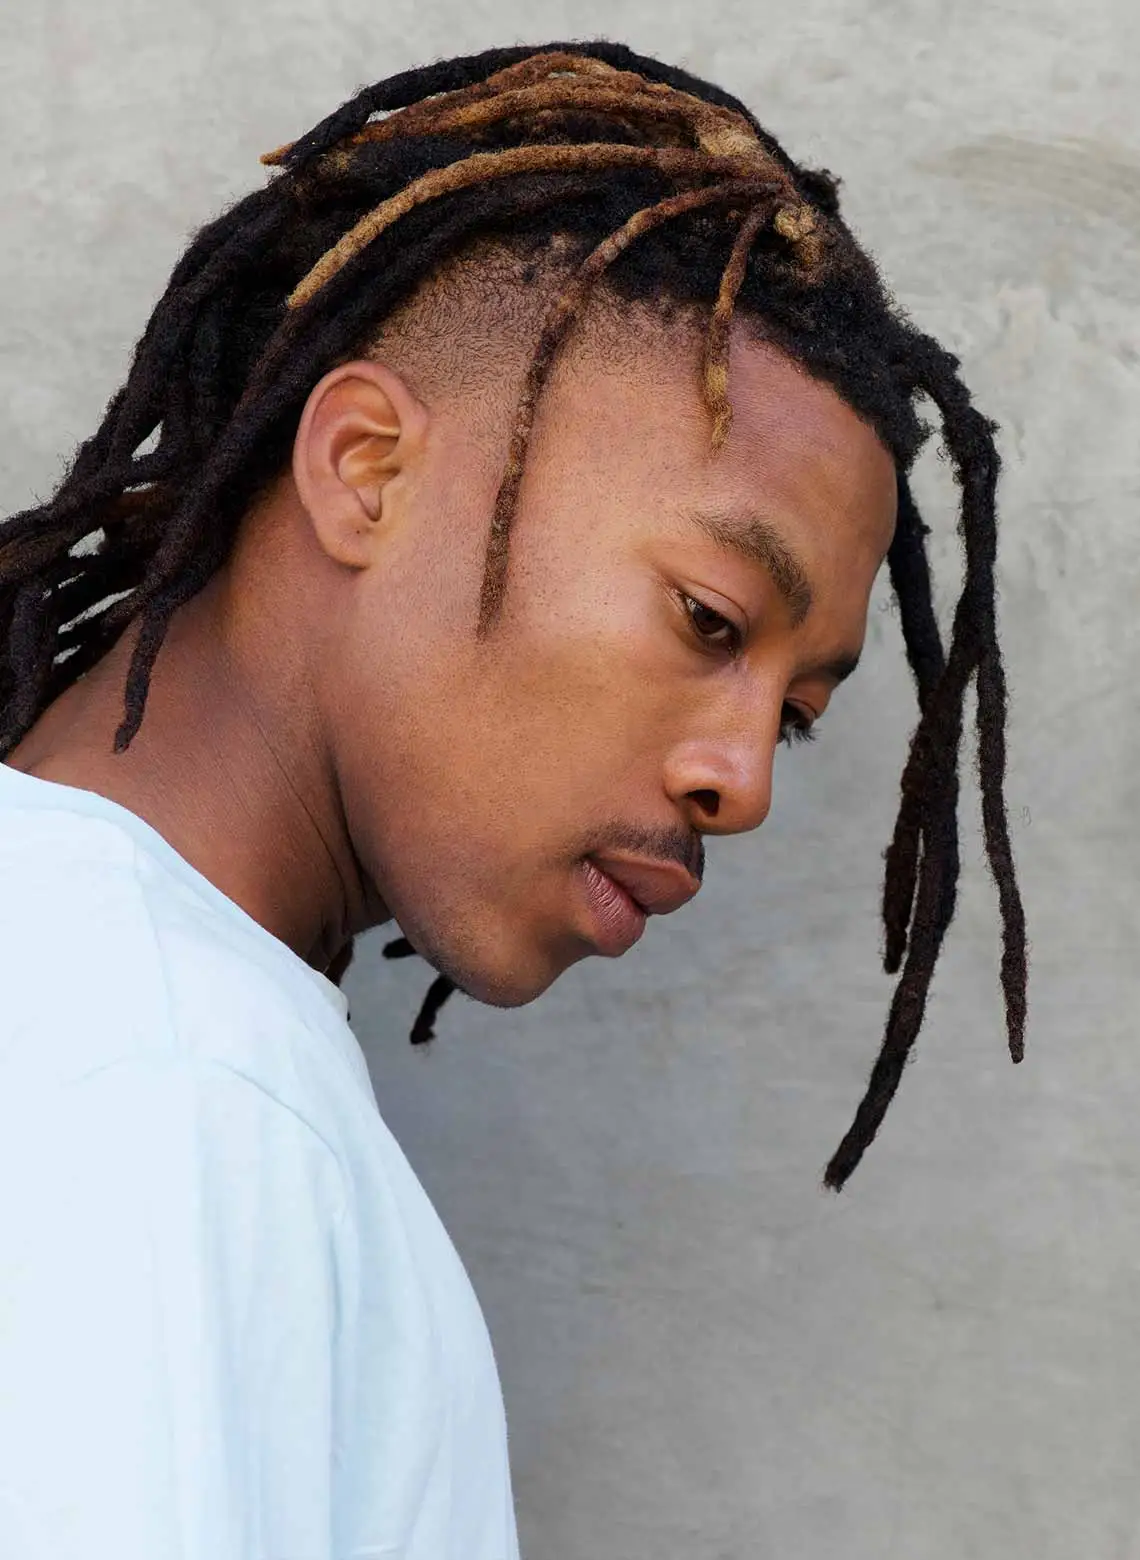 Image of man with locs and an undercut.